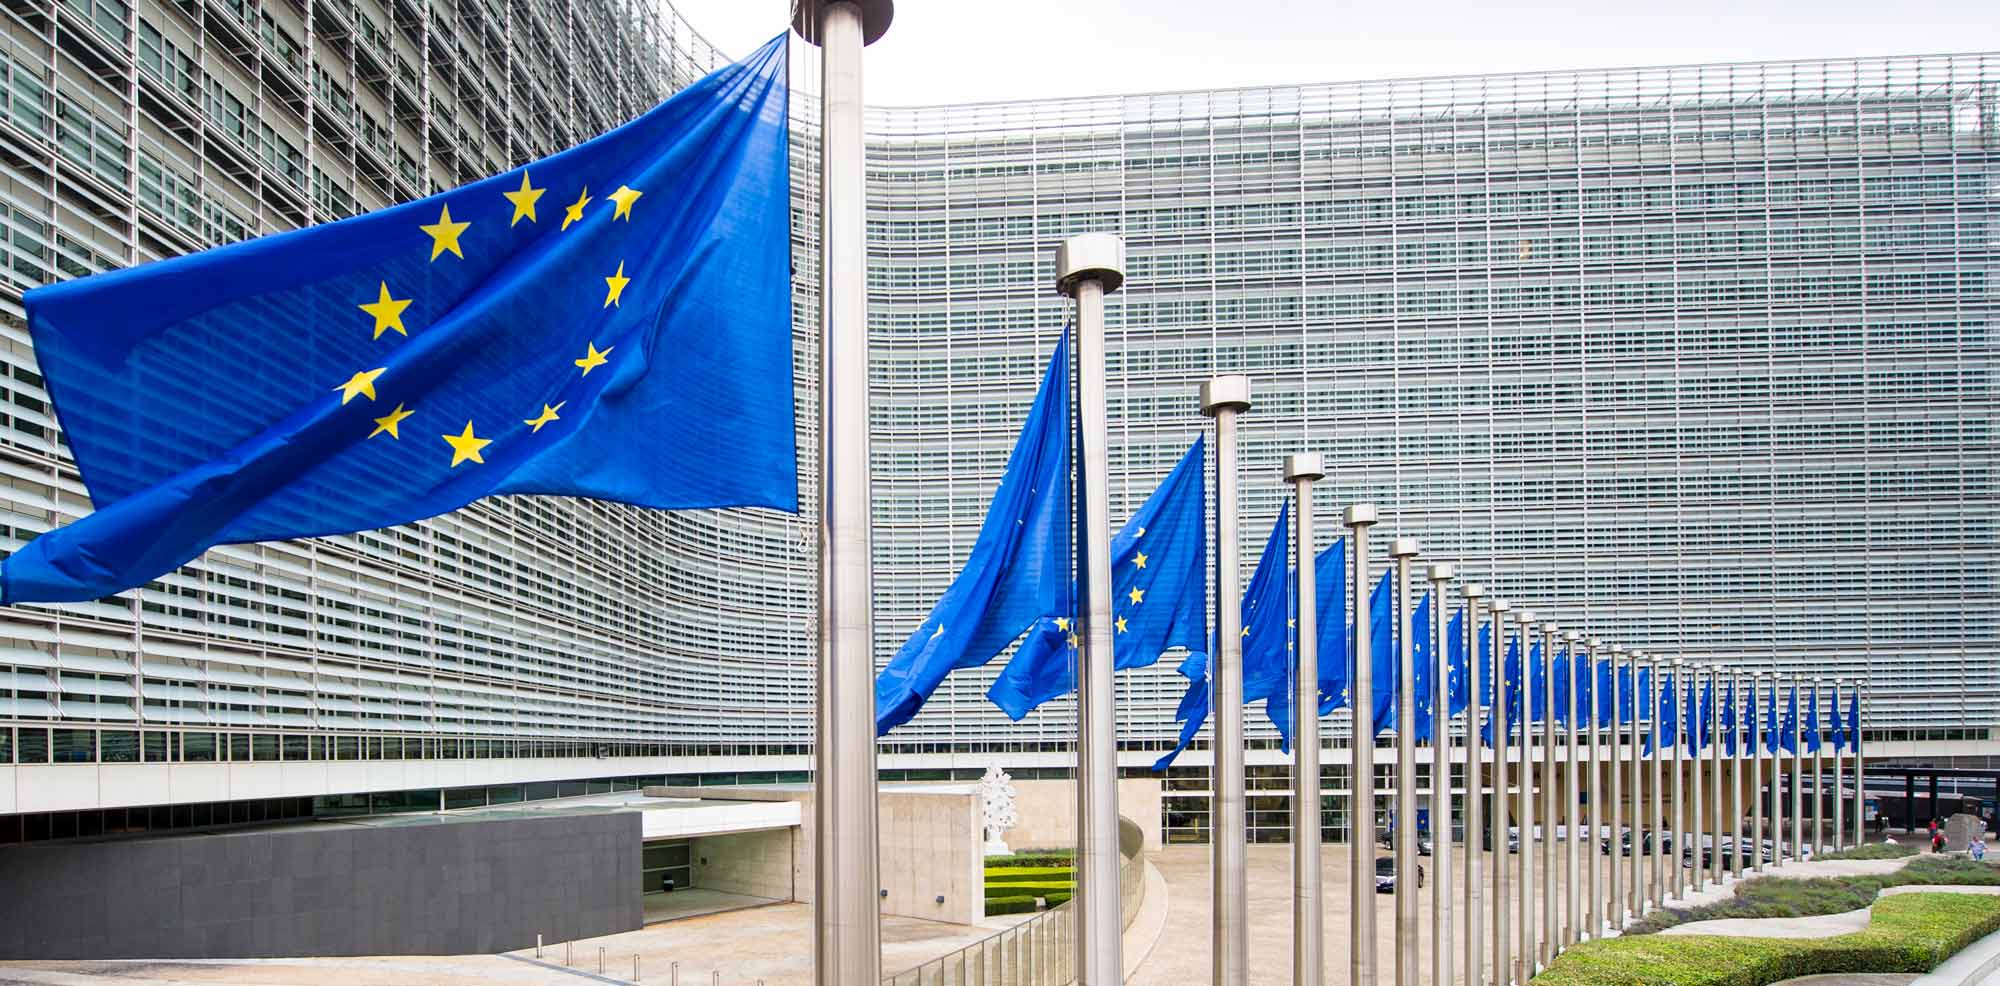 EU Announces Sale of Furniture and Other Items